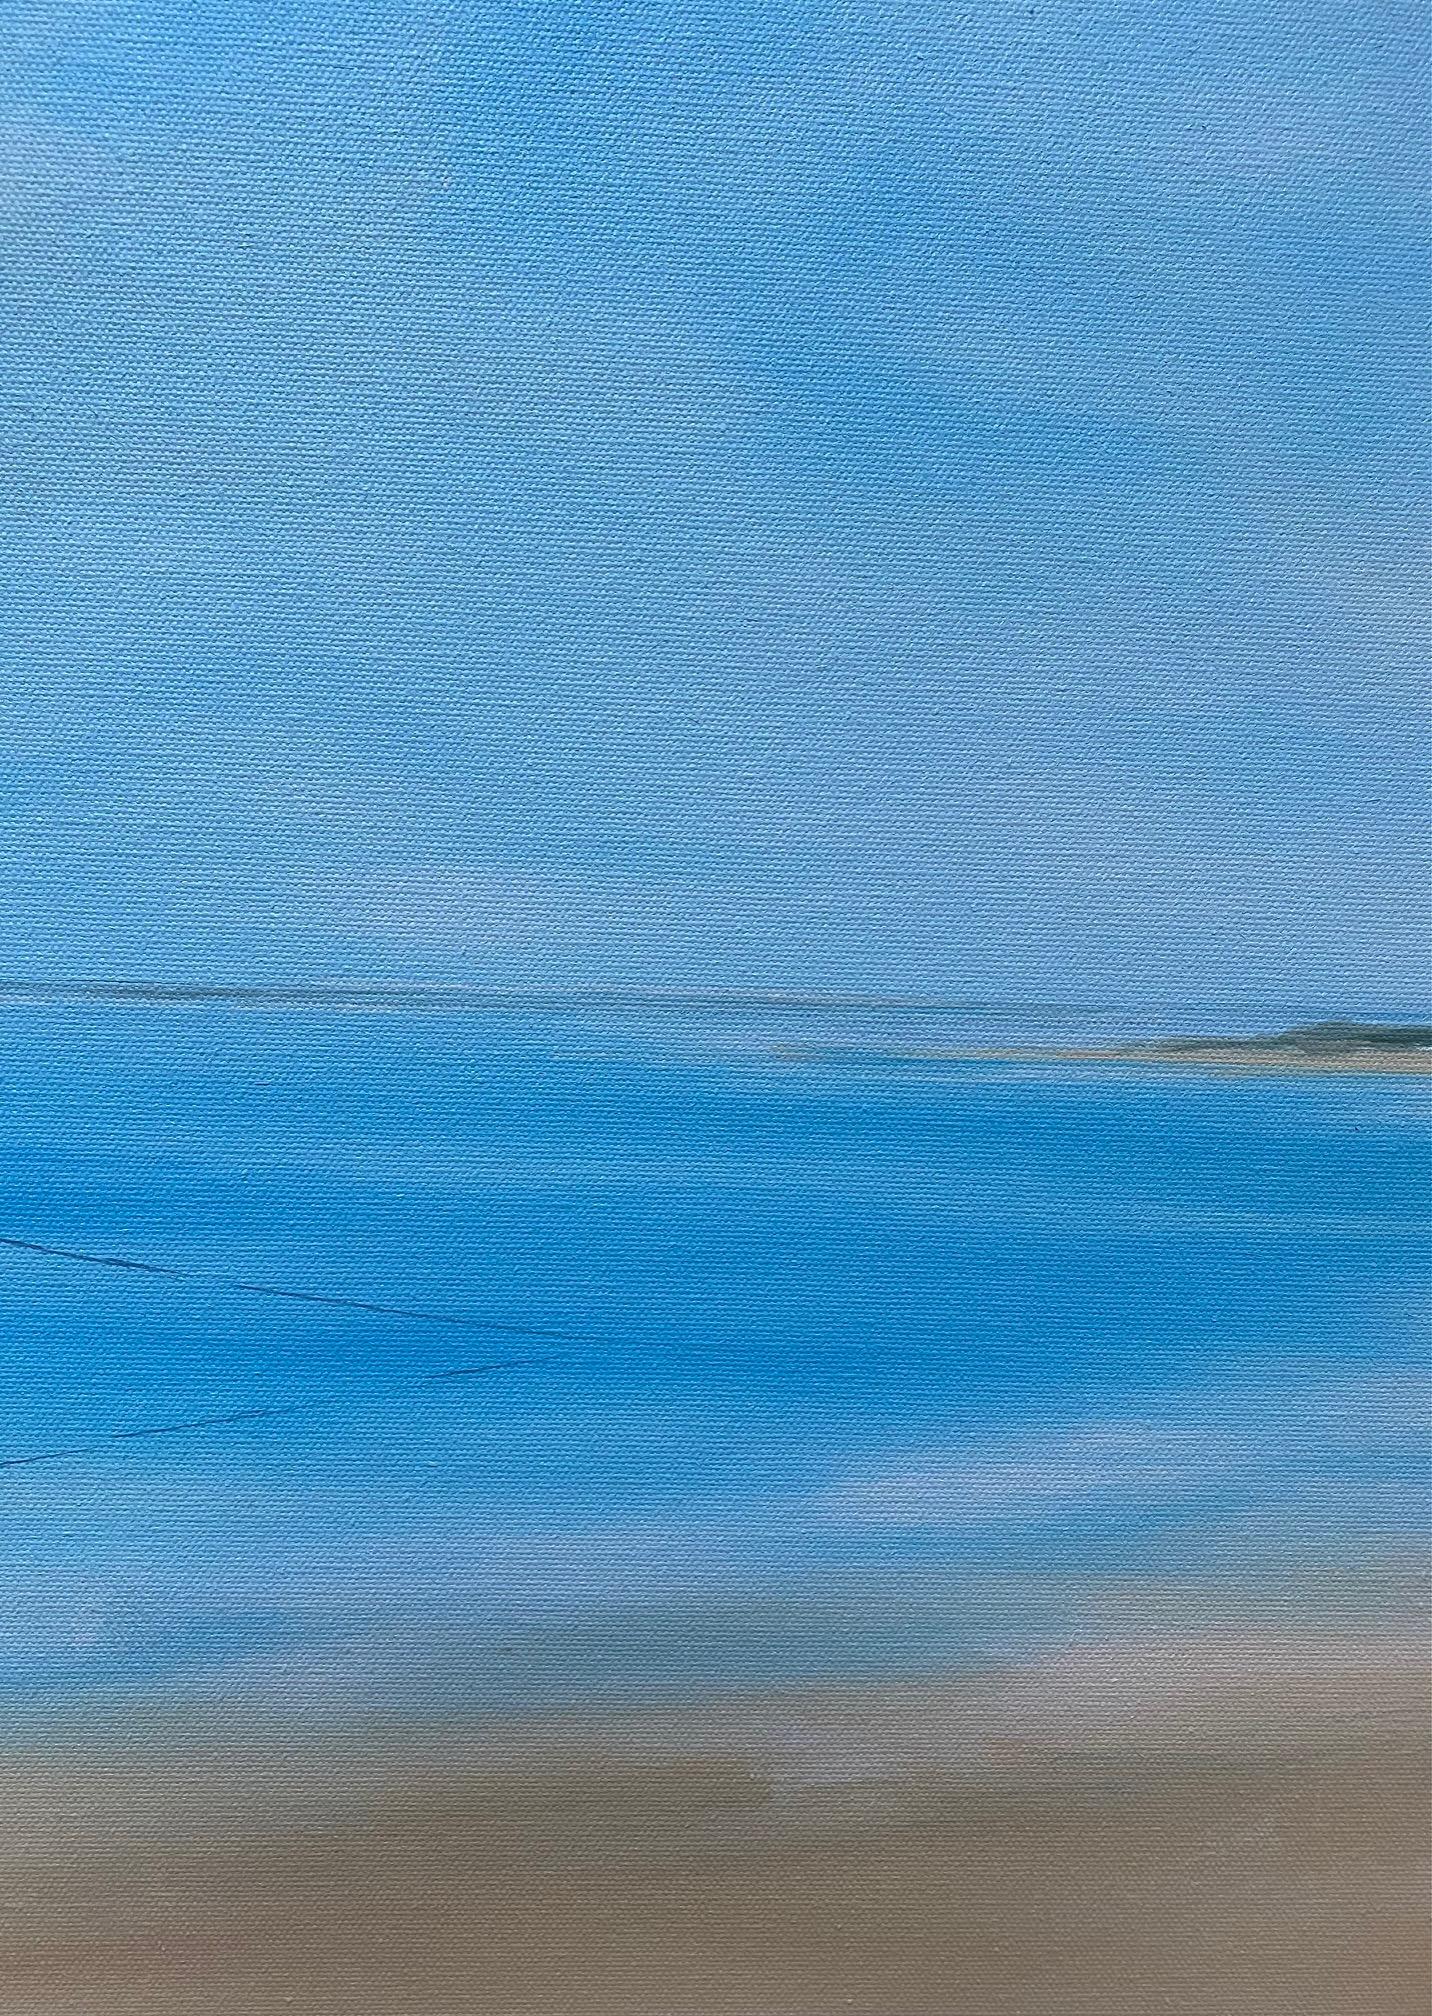 For love of the sand and sea, the tan sand is resplendent with the vast layers of turquoise spreading from the ocean and across the sky.  You encounter a contemporary marine landscape, a linear and clean composition, presented with realist brush